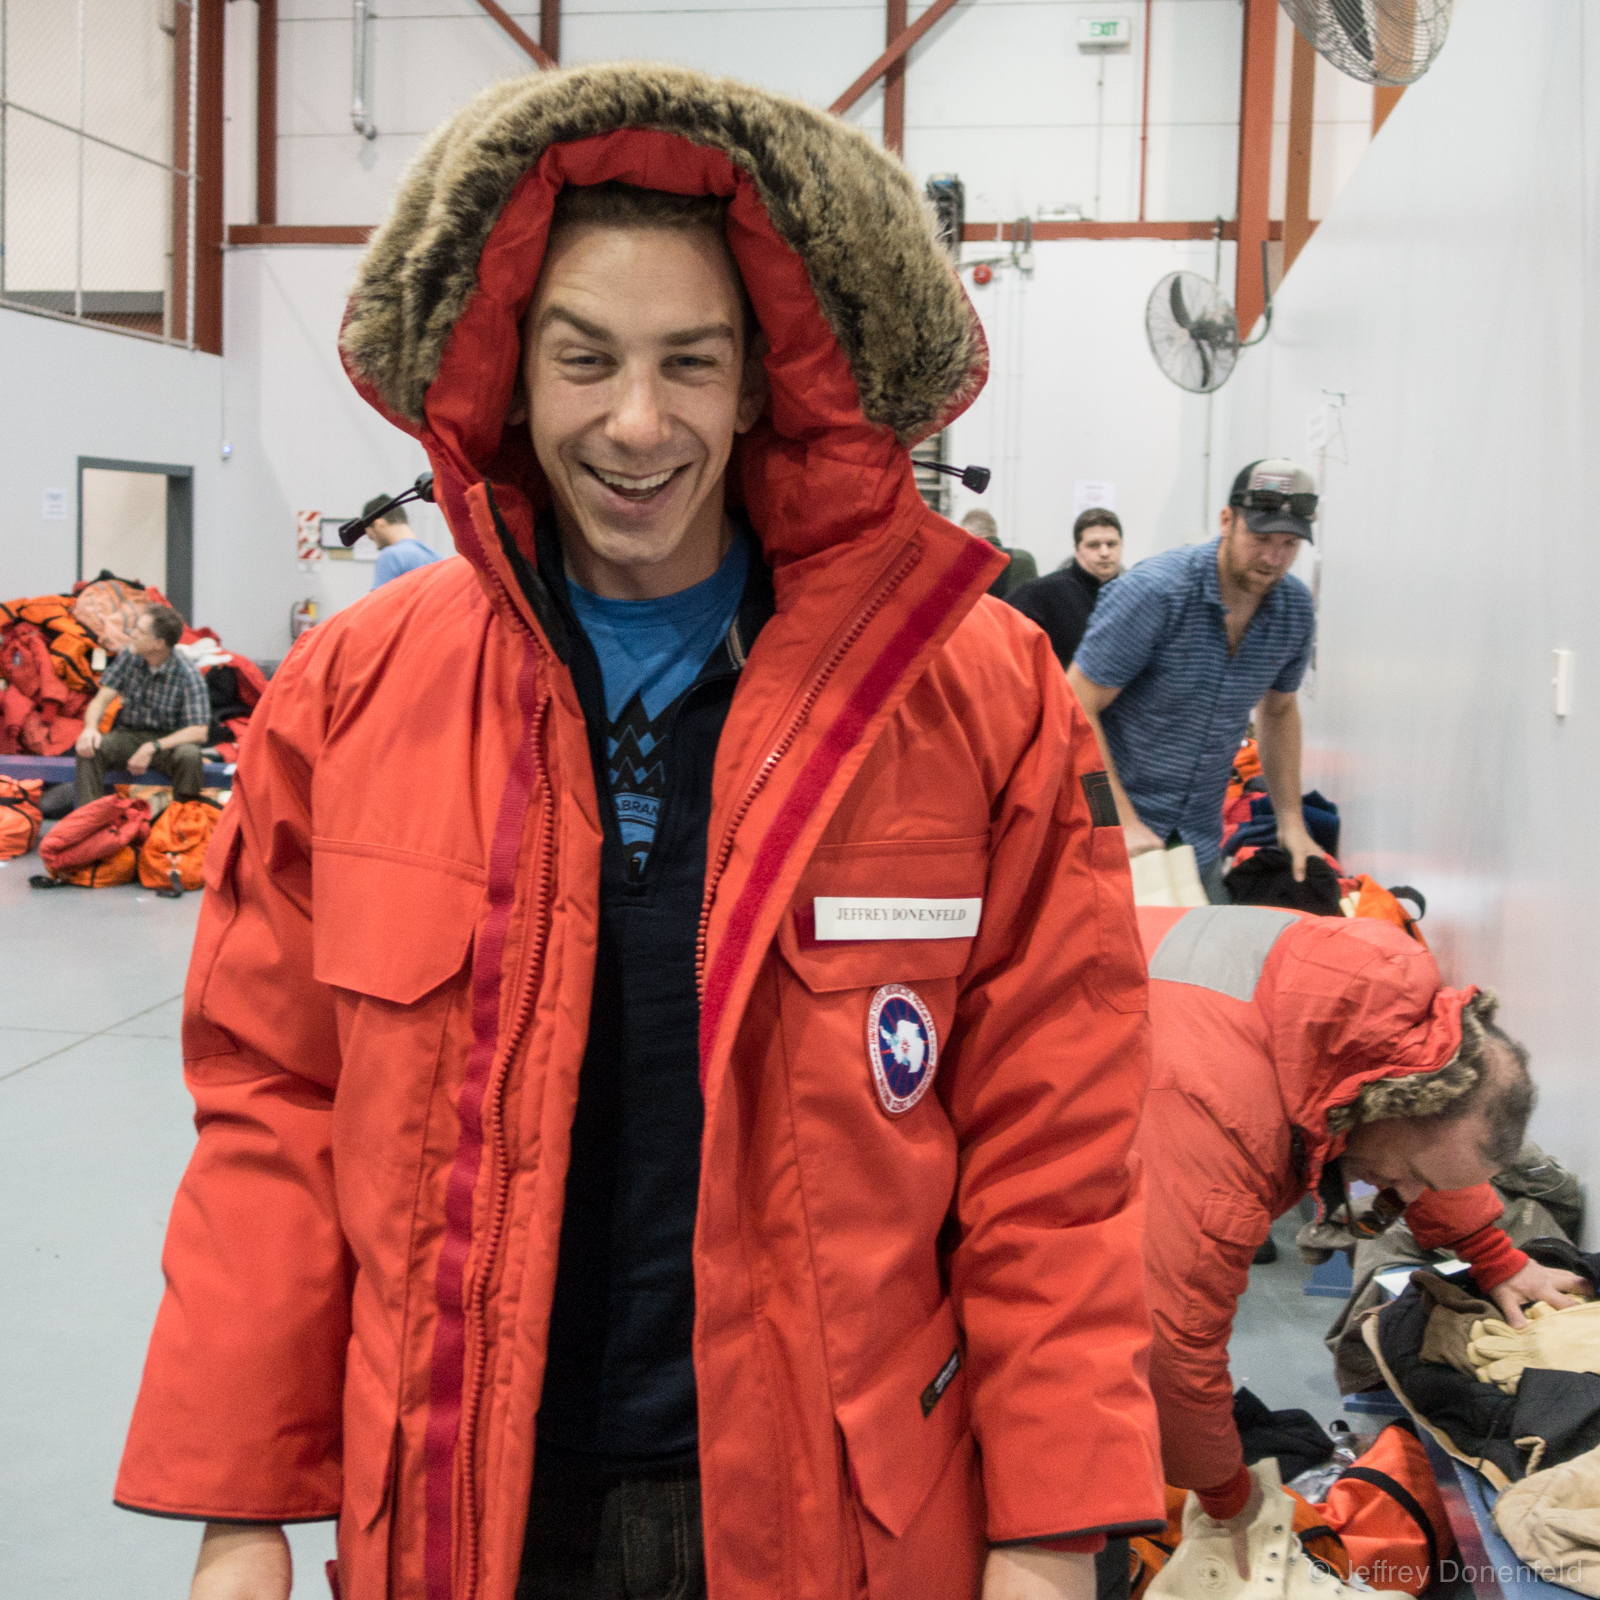 Me trying on my Canada Goose brand "Big Red" standard issue parka. Each parka has an official program patch, as well as a nametag.